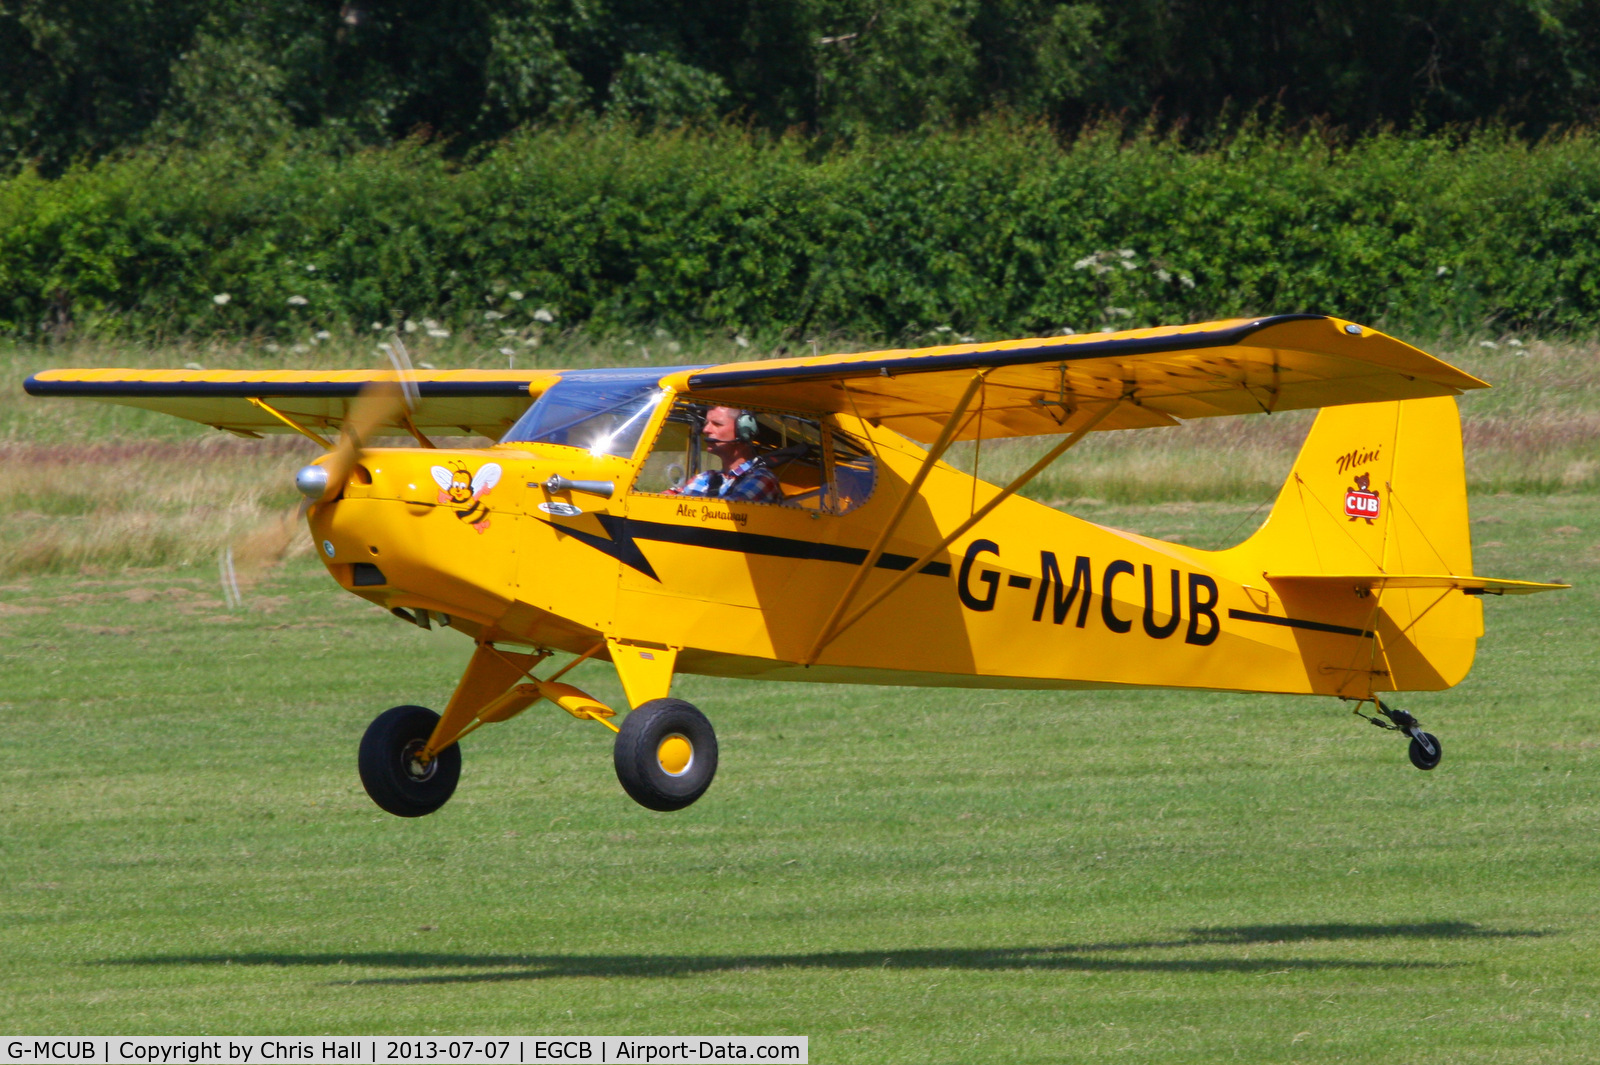 G-MCUB, 2007 Reality Escapade C/N PFA 345-14680, at the Barton open day and fly in